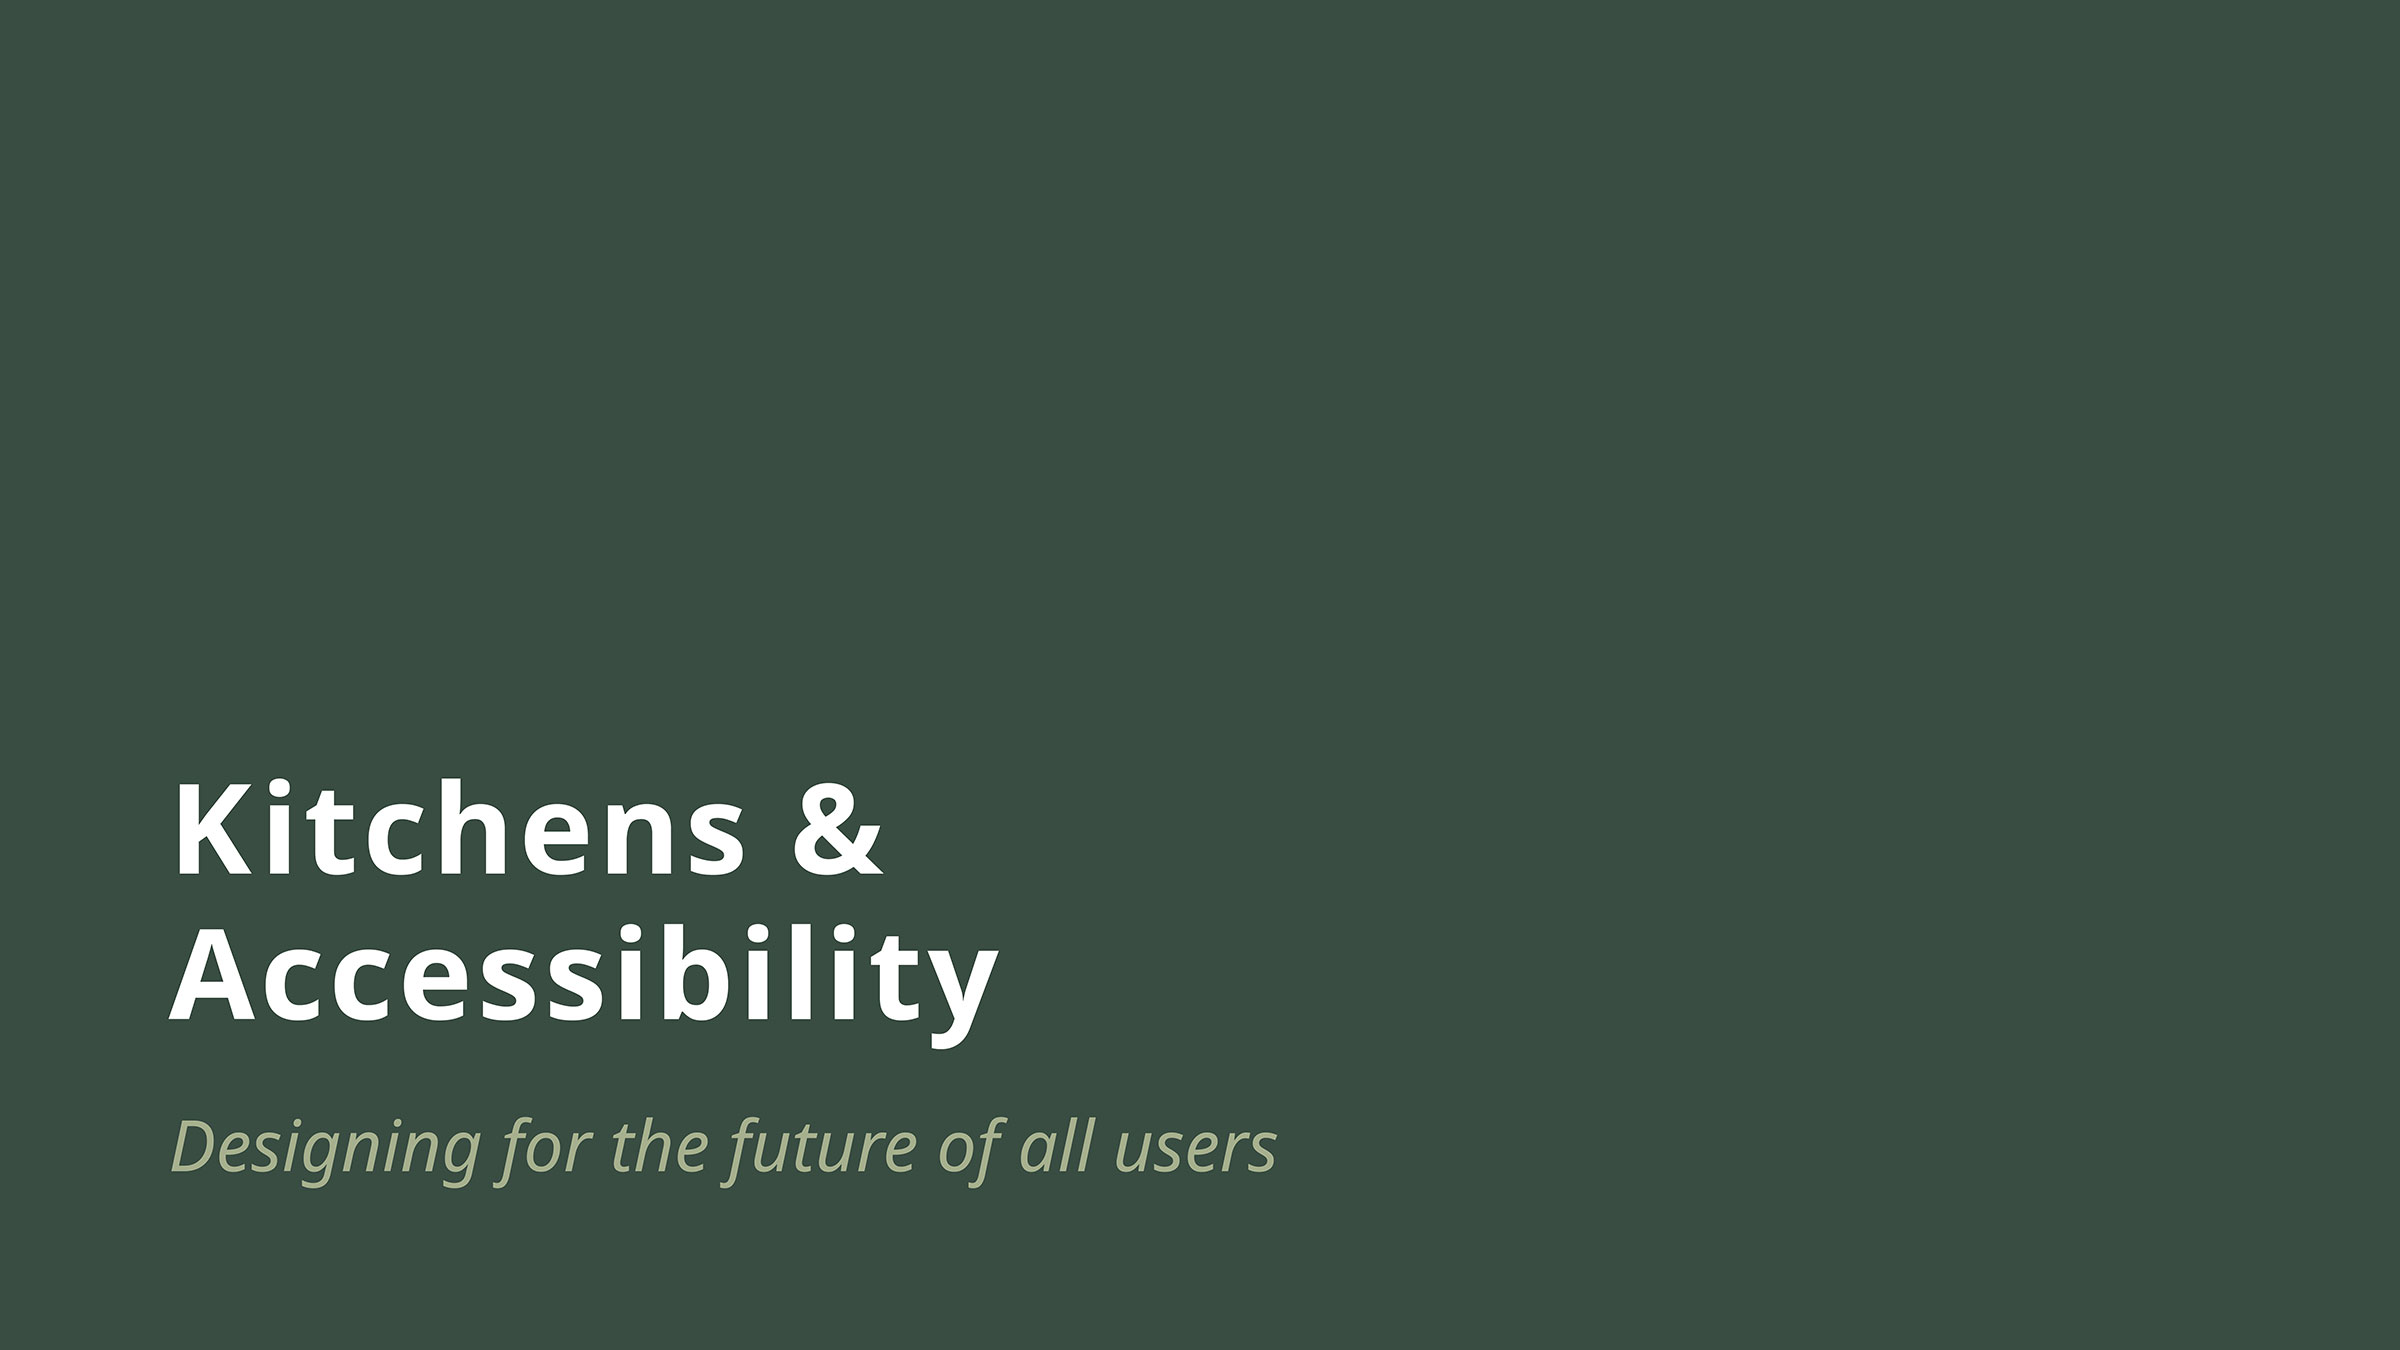 Slide deck cover page. Title: Kitchens and Accessibility. Subtitle: Designing for the future of all users.